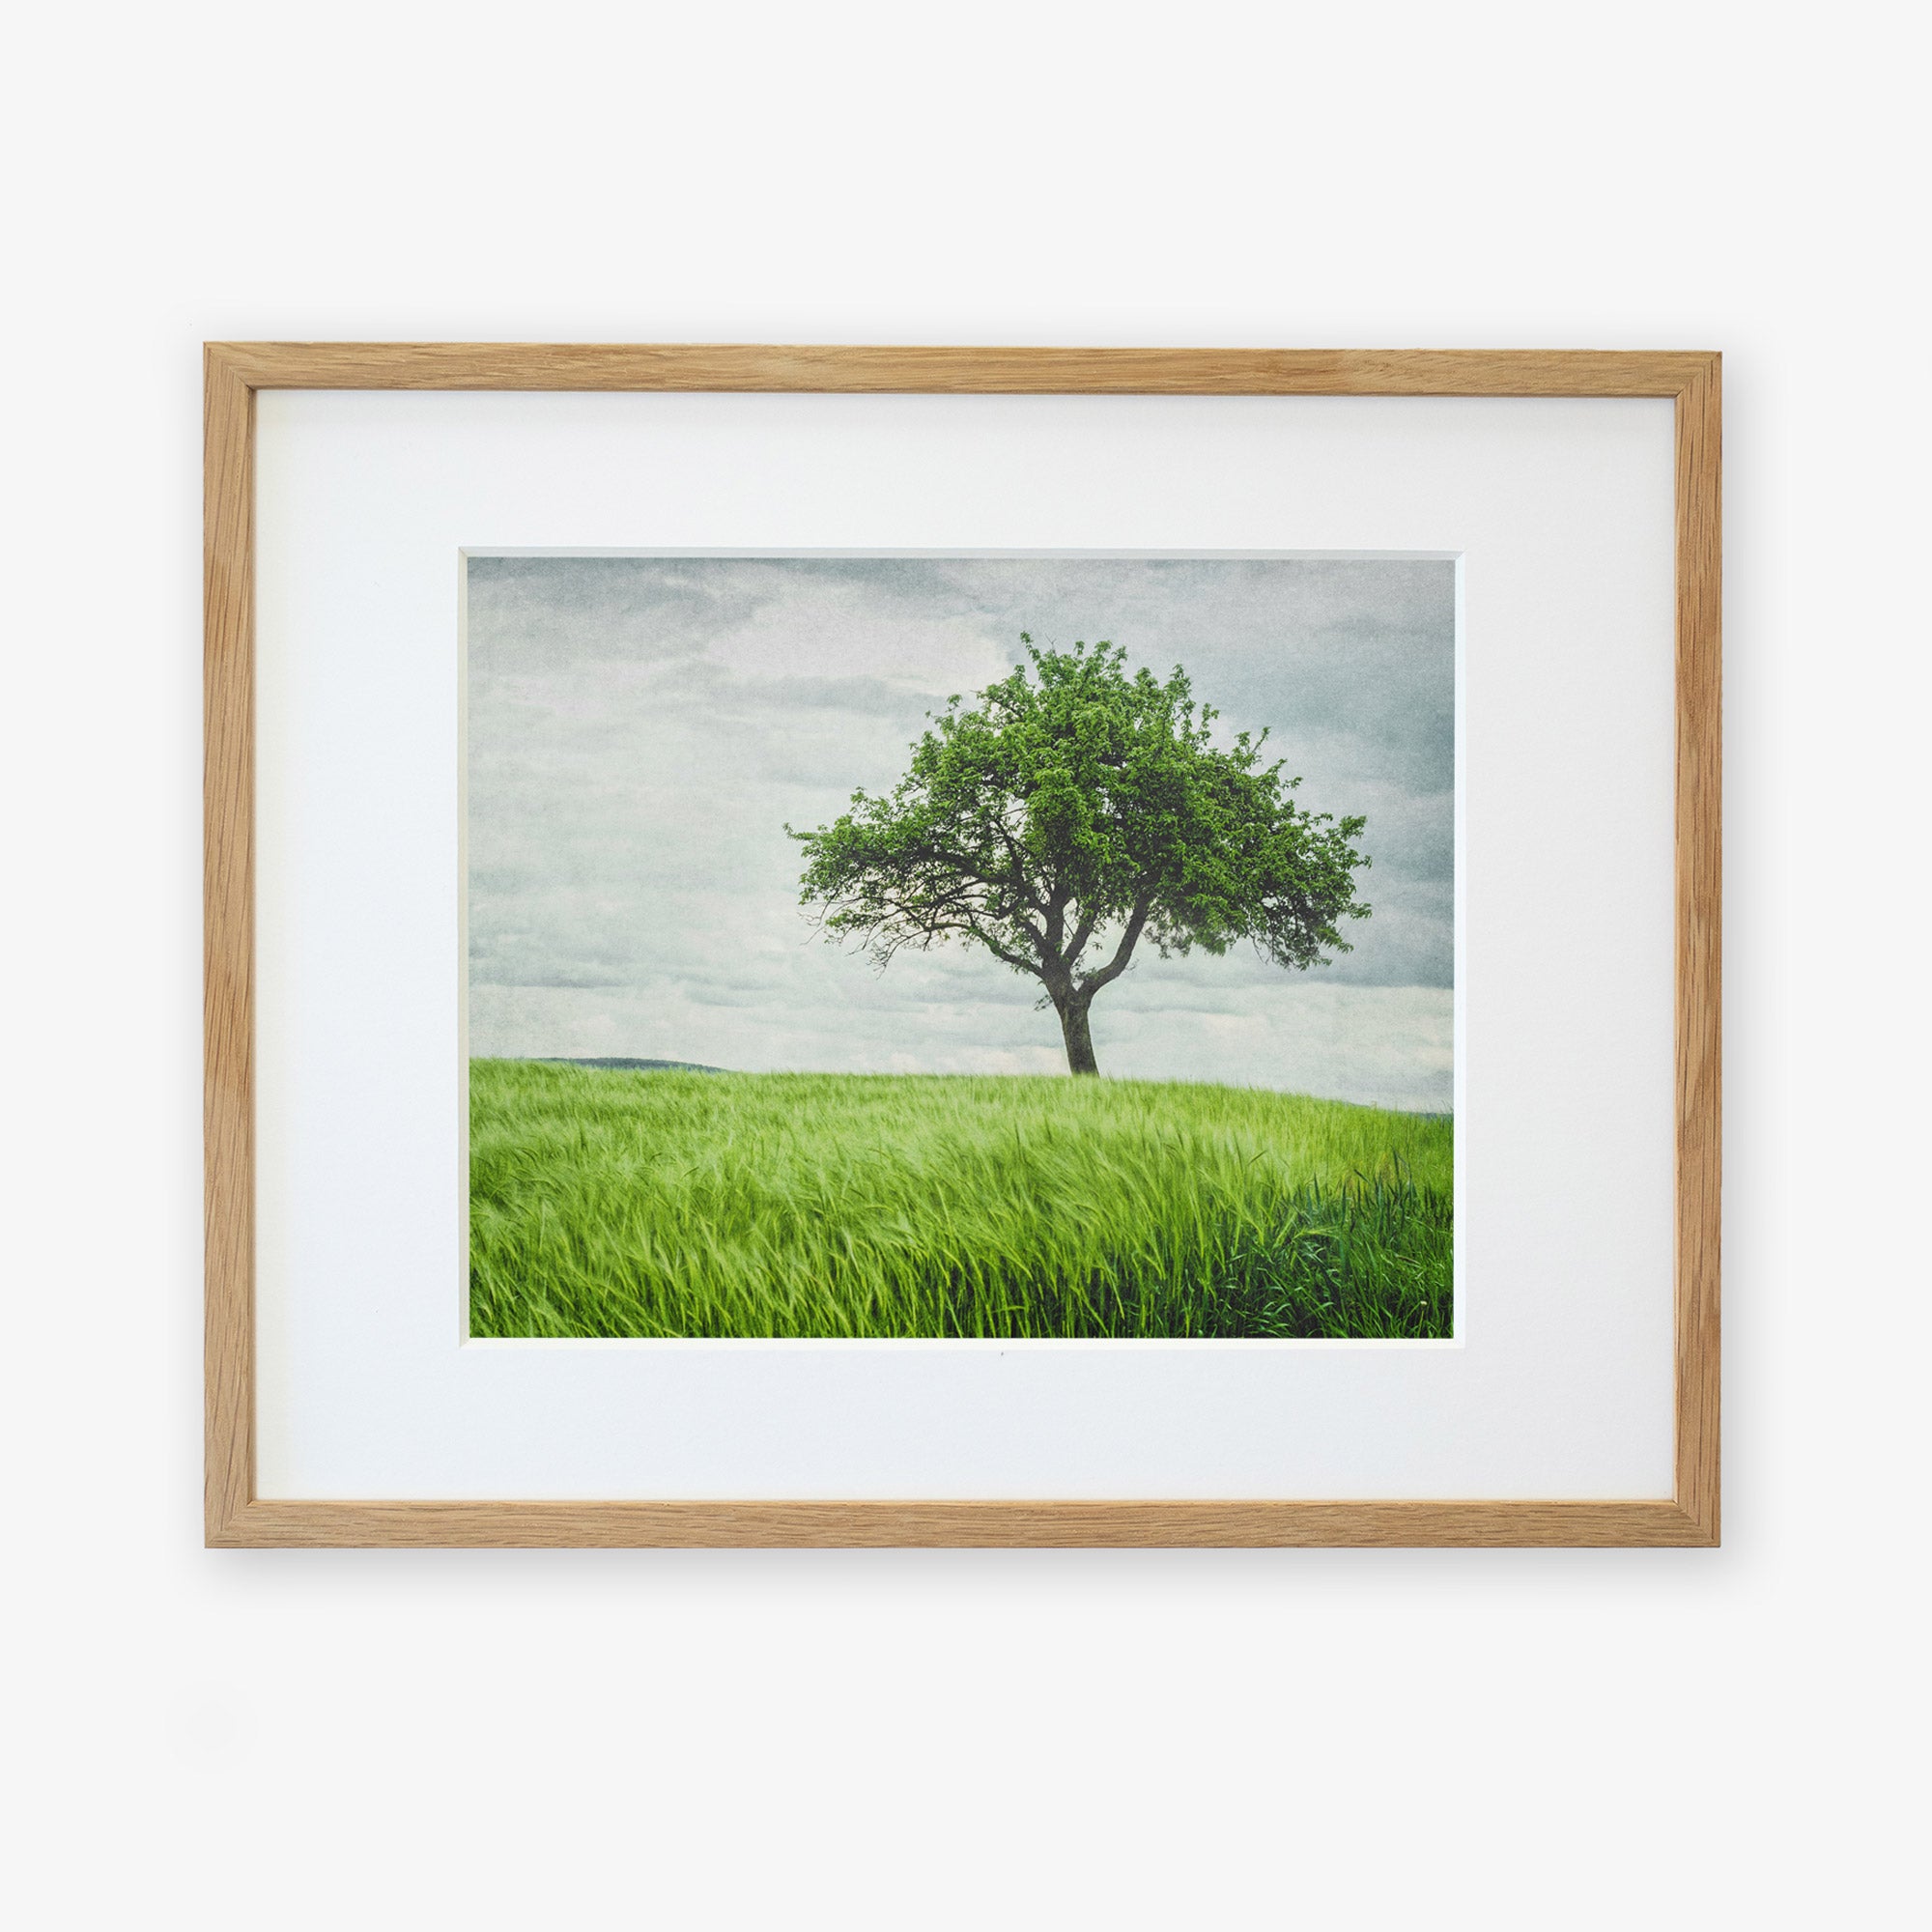 Framed photograph of a solitary tree in the center of a lush, green field under storm clouds. The wooden frame has a natural finish, and the image, printed on archival photographic paper, is matted in white, enhancing the serene landscape. This is the Rustic Countryside Print, 'Tree in a Field' by Offley Green.